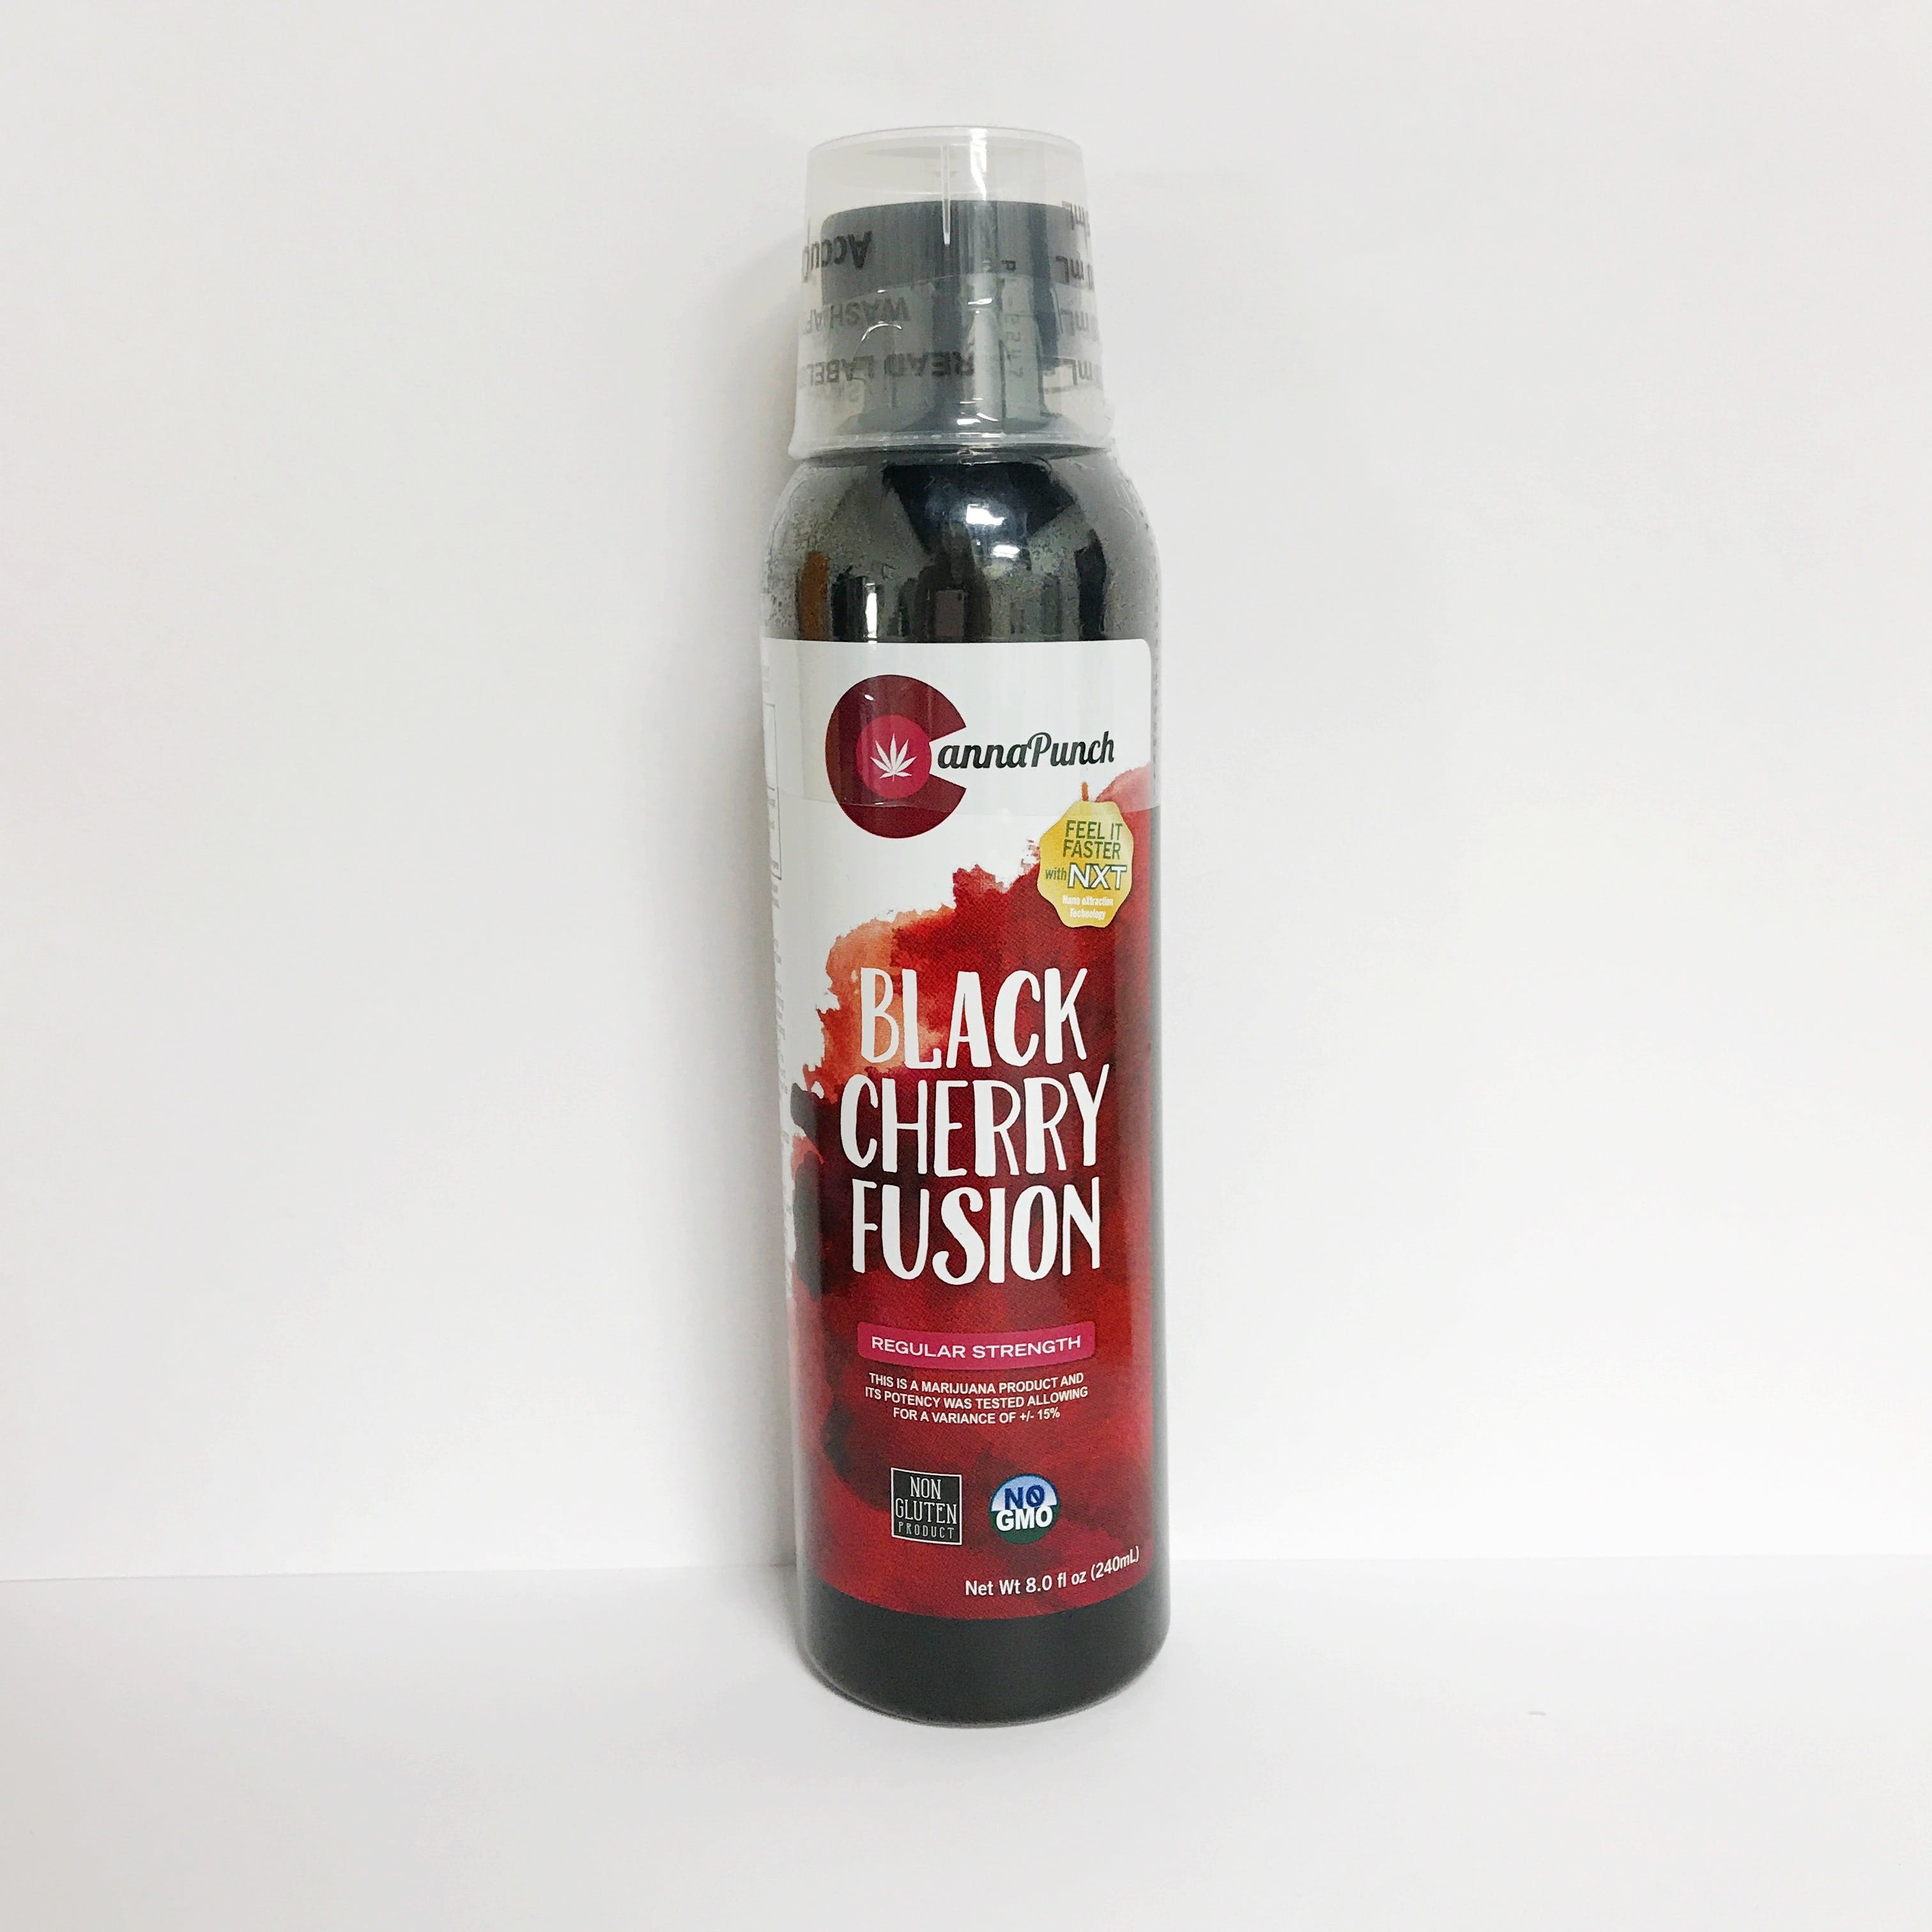 Black Cherry Fusion 100mg - CannaPunch